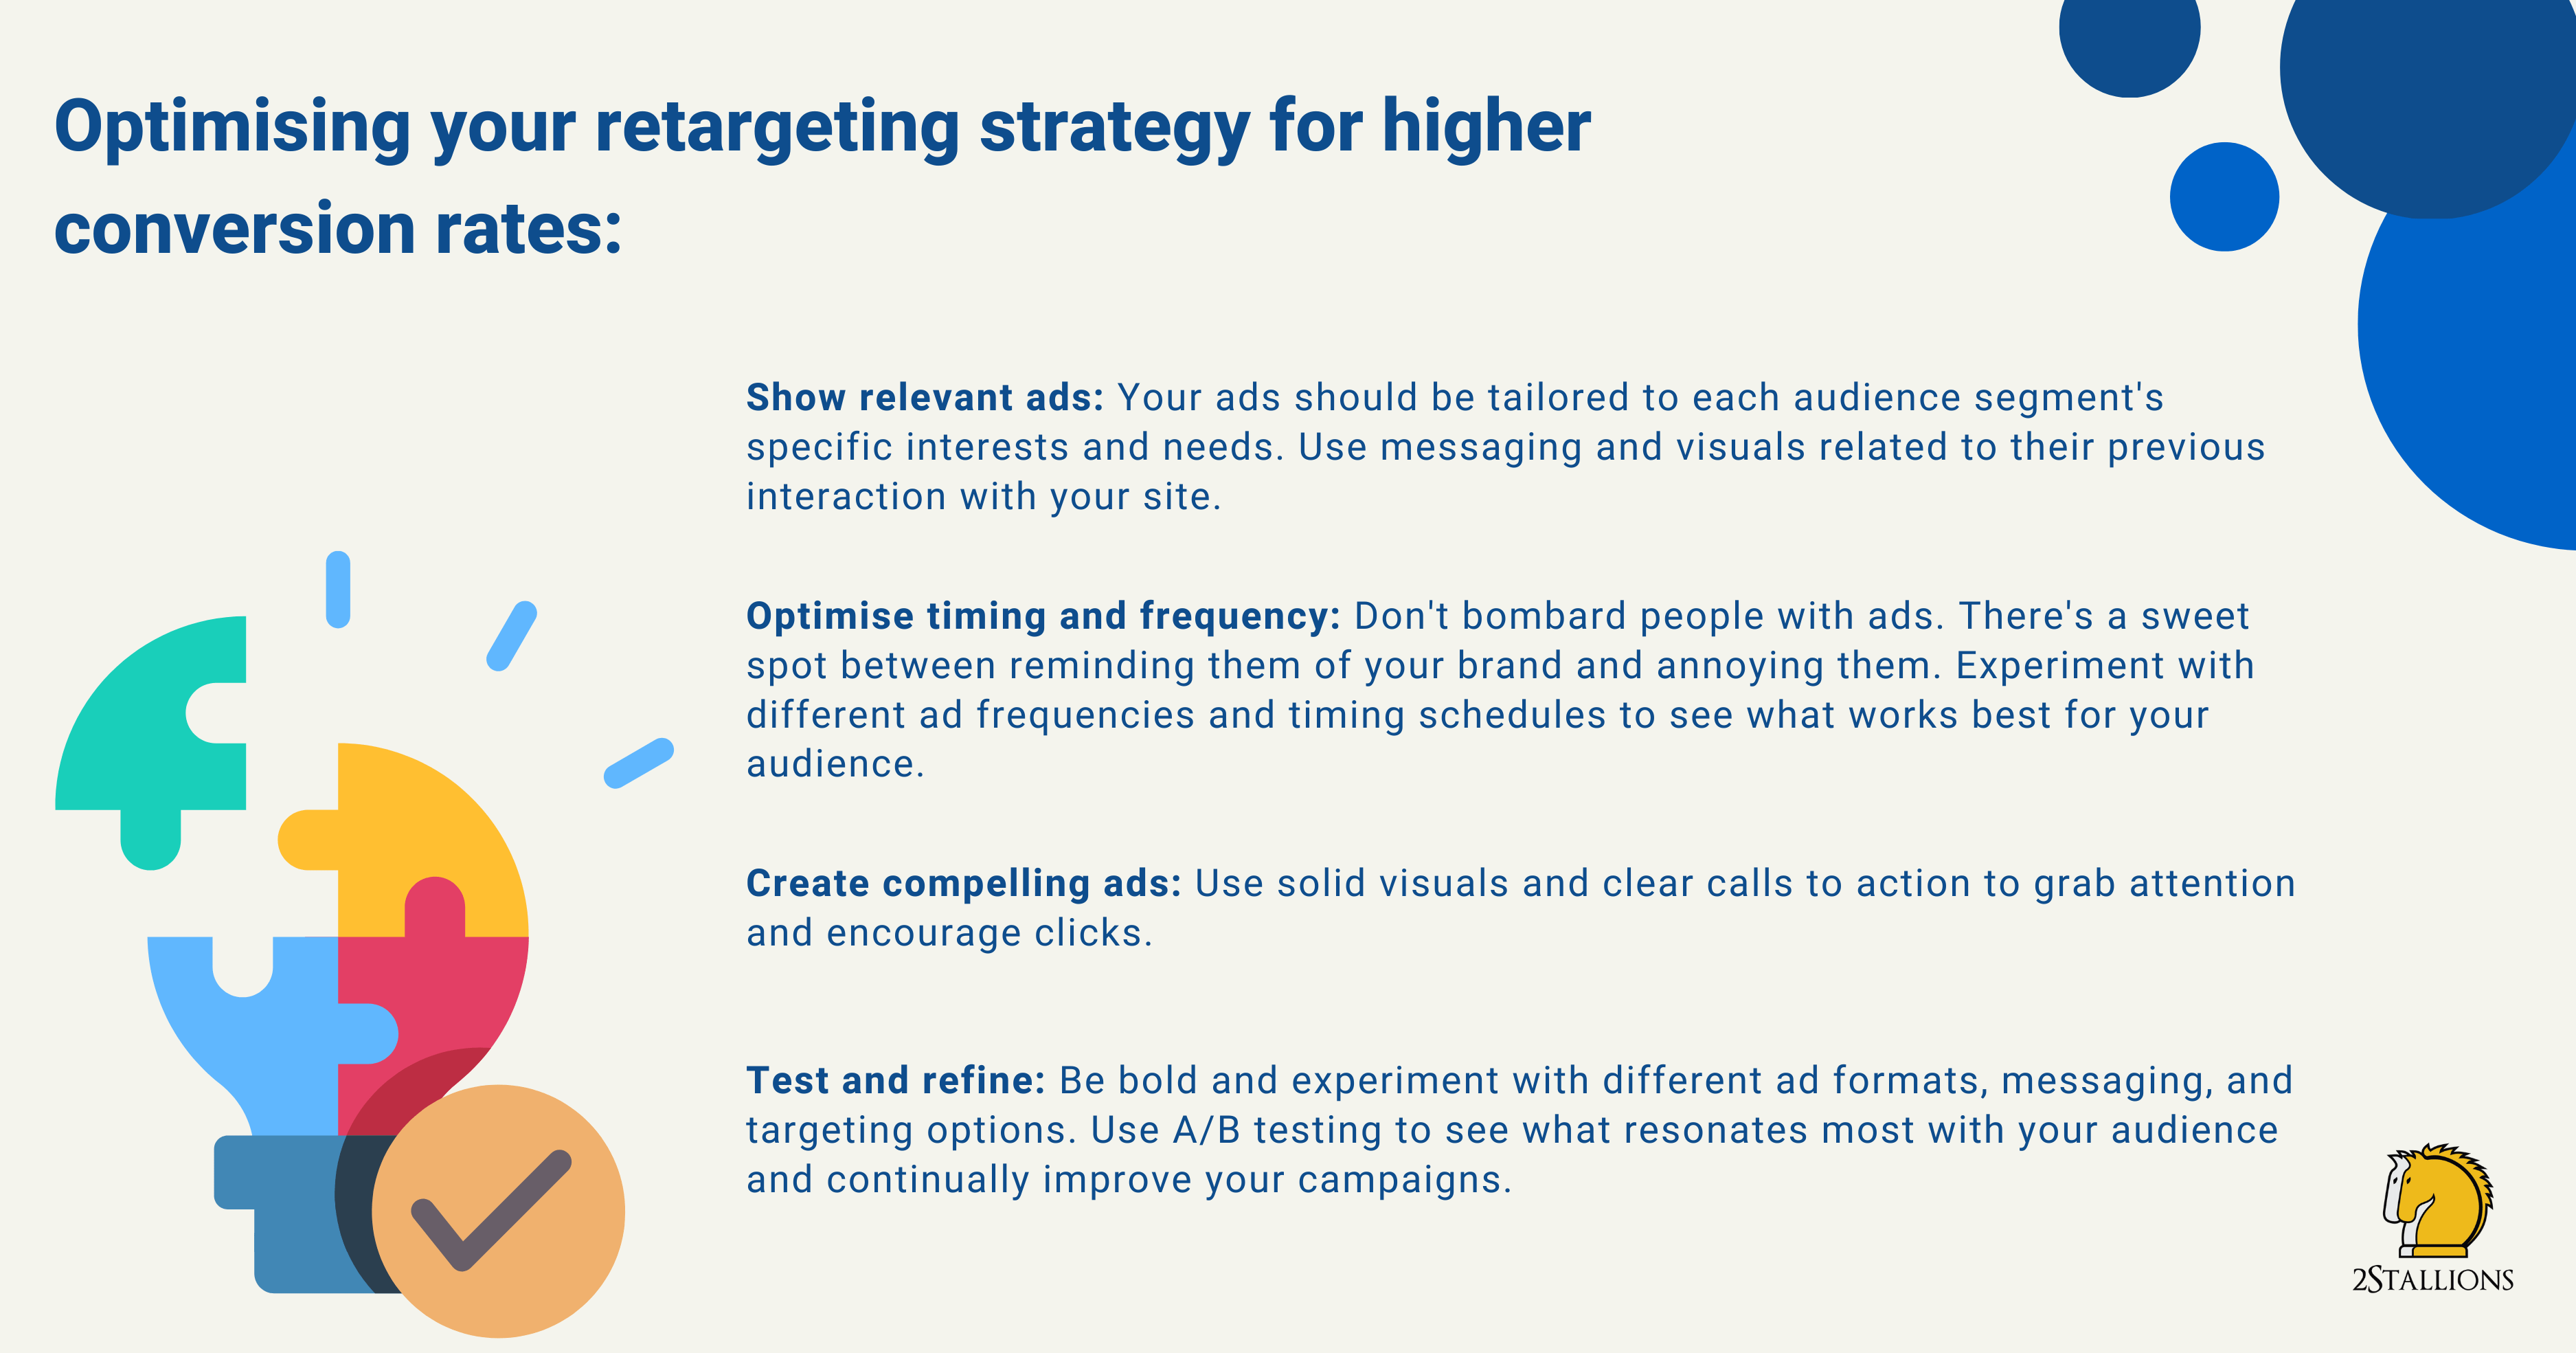 Optimising Your Retargeting Strategy for Higher Conversion Rates | 2Stallions